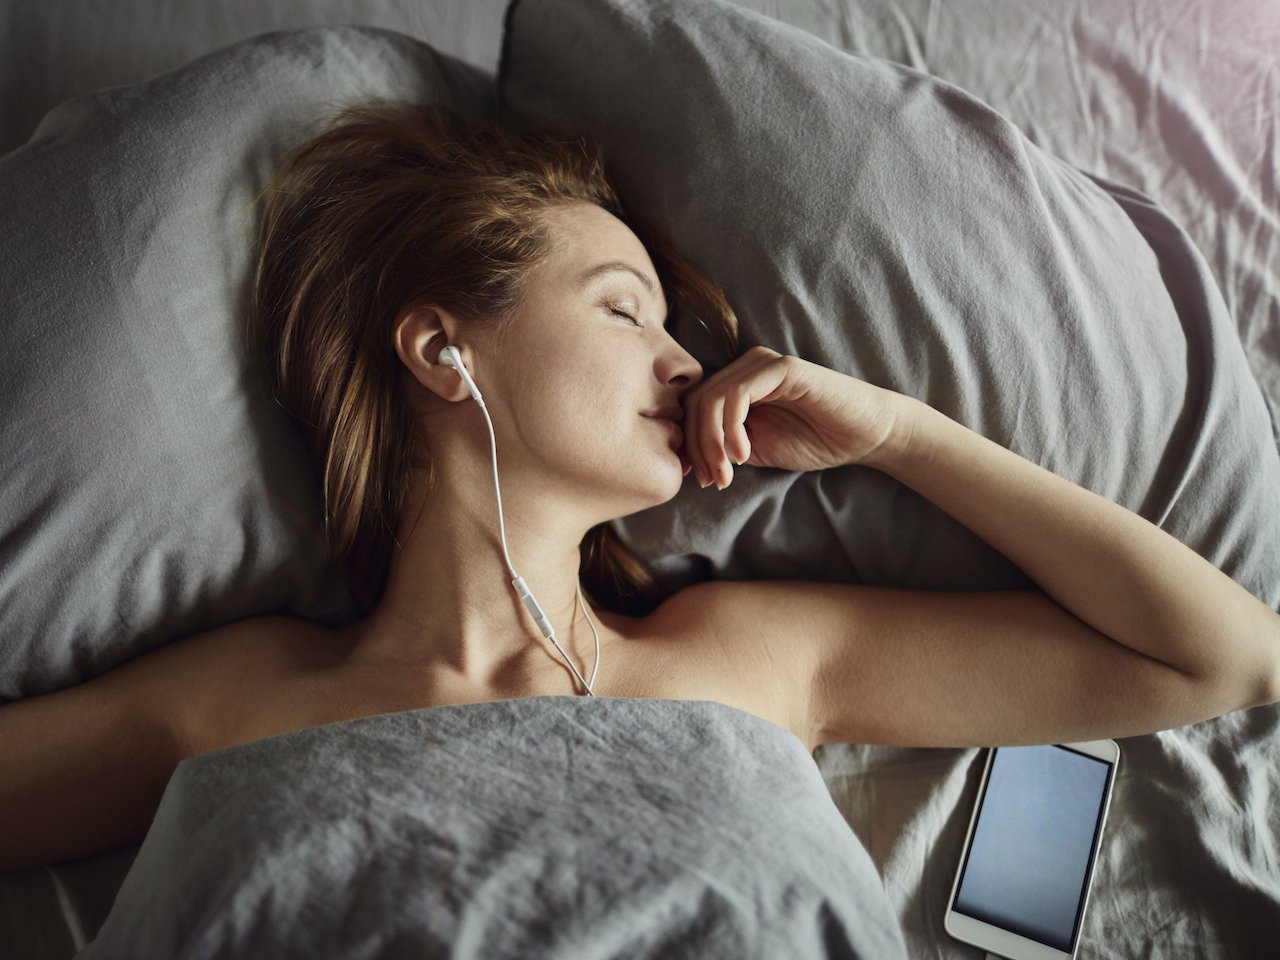 Photo of a woman sleeping with headphones on and her phone next to her